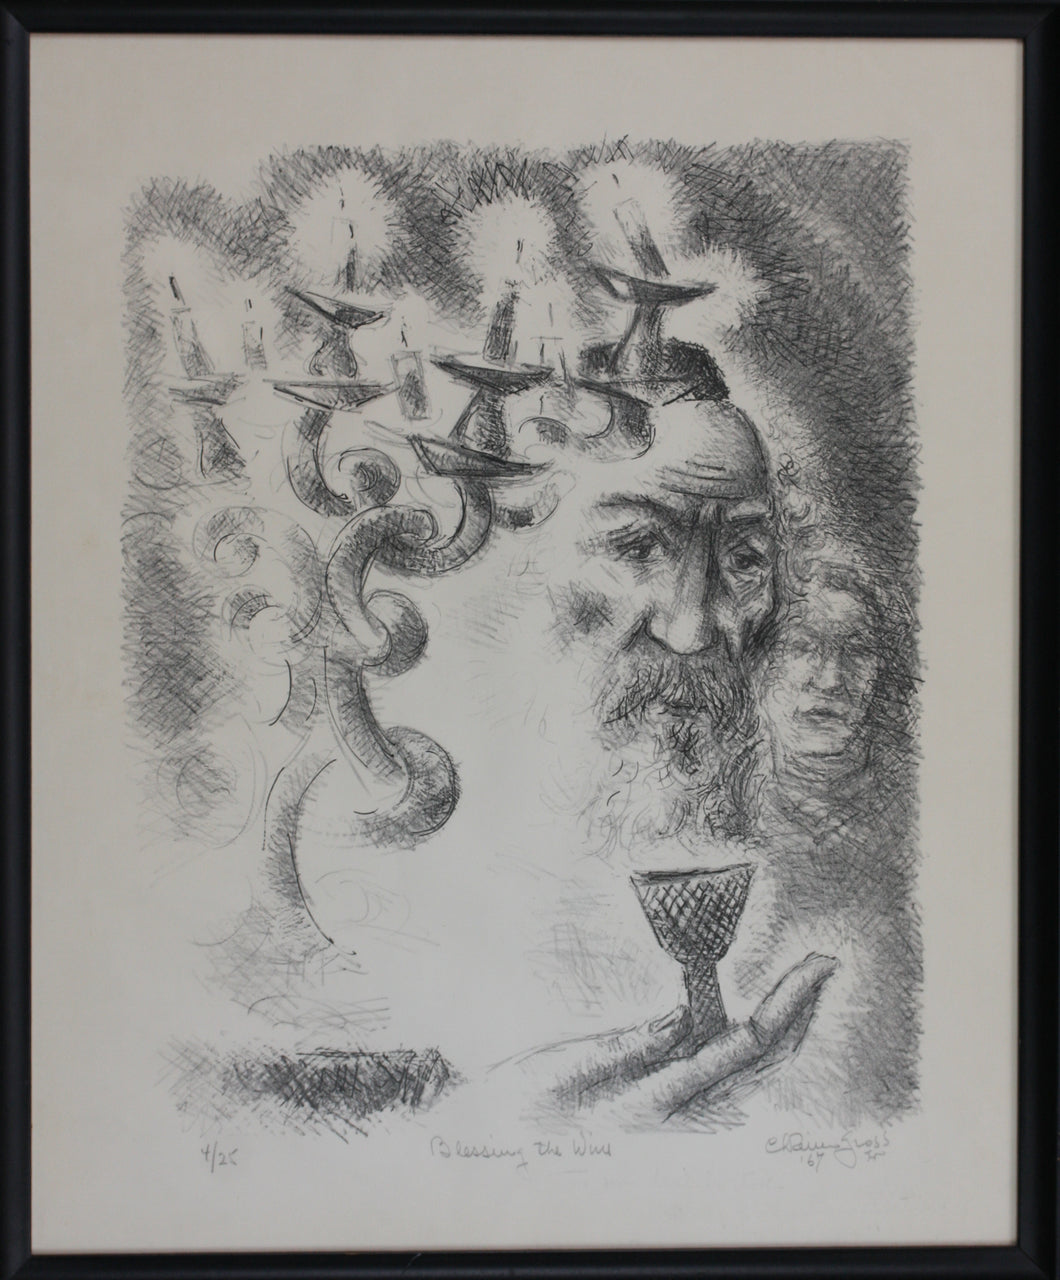 Chaim Gross. Blessing the Wine. Lithograph. 1967.